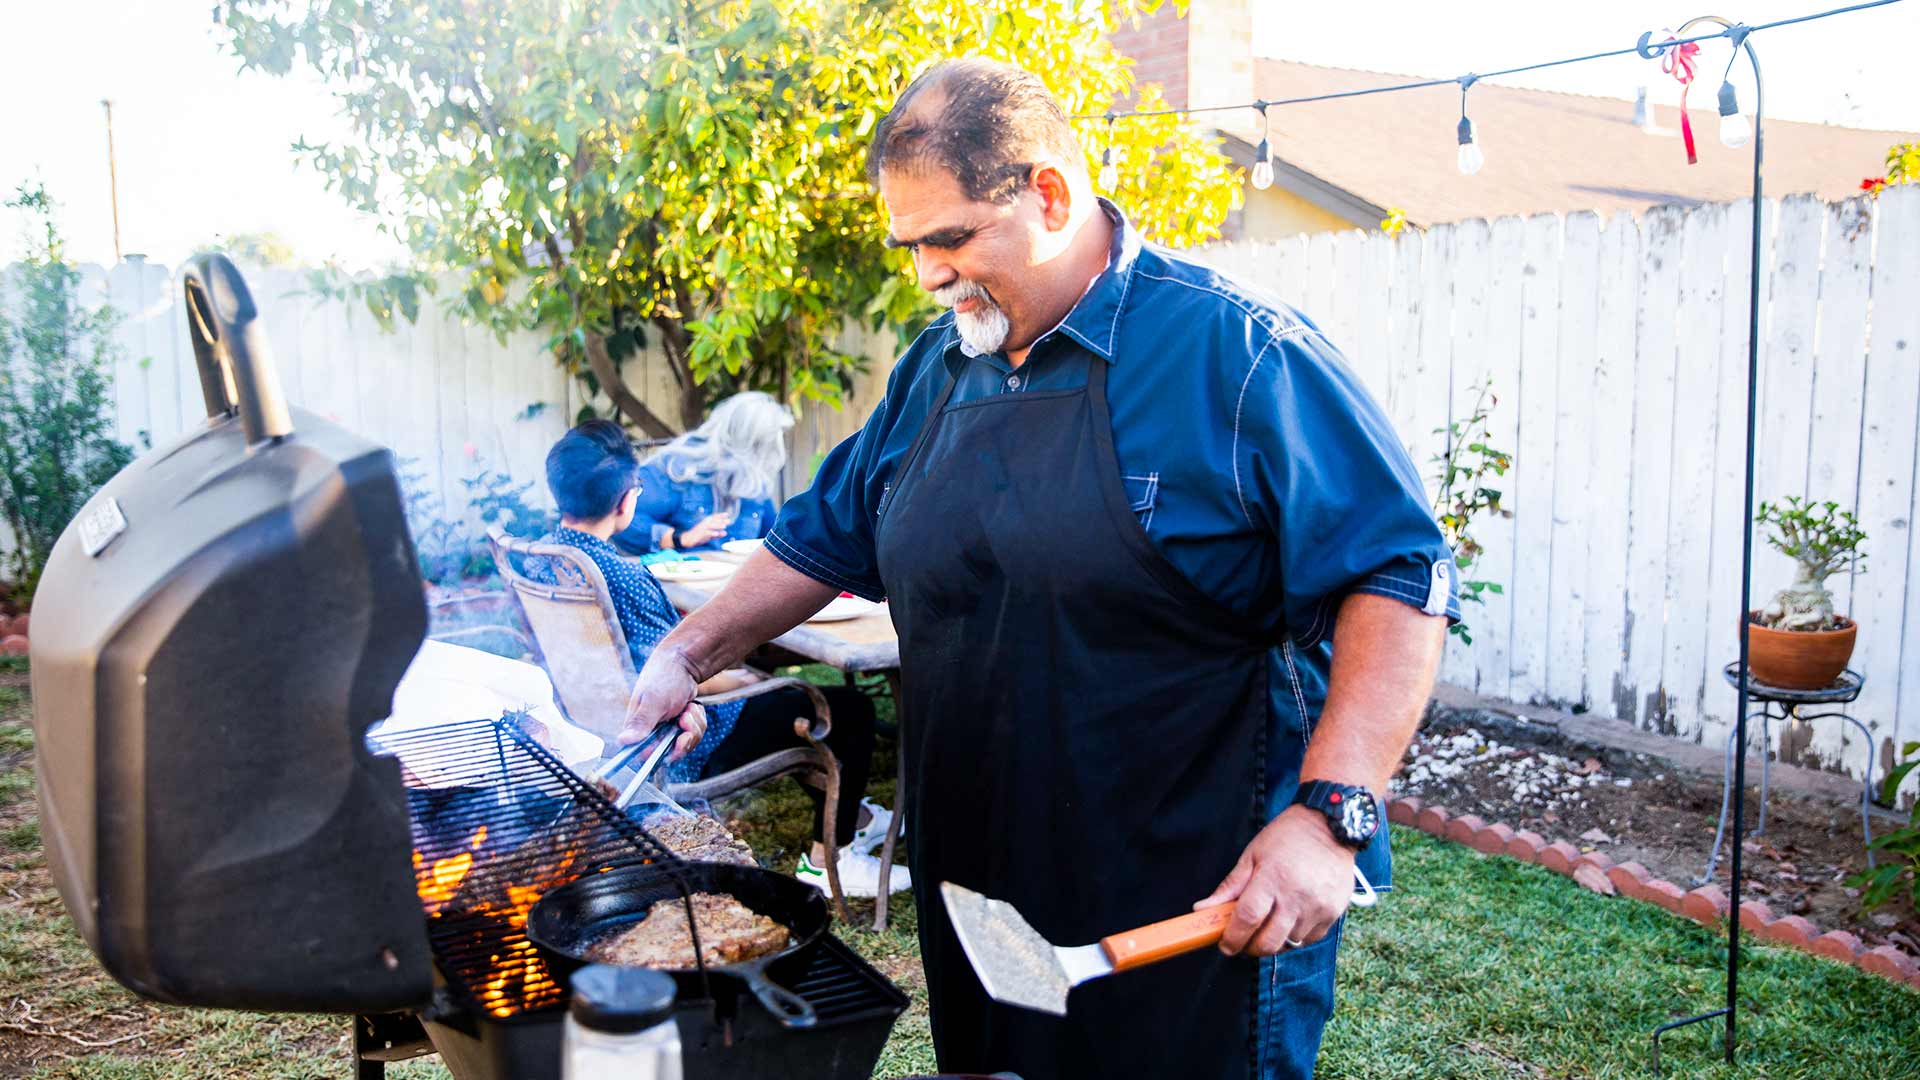 8 Grilling Safety Tips for Summer Cookouts 